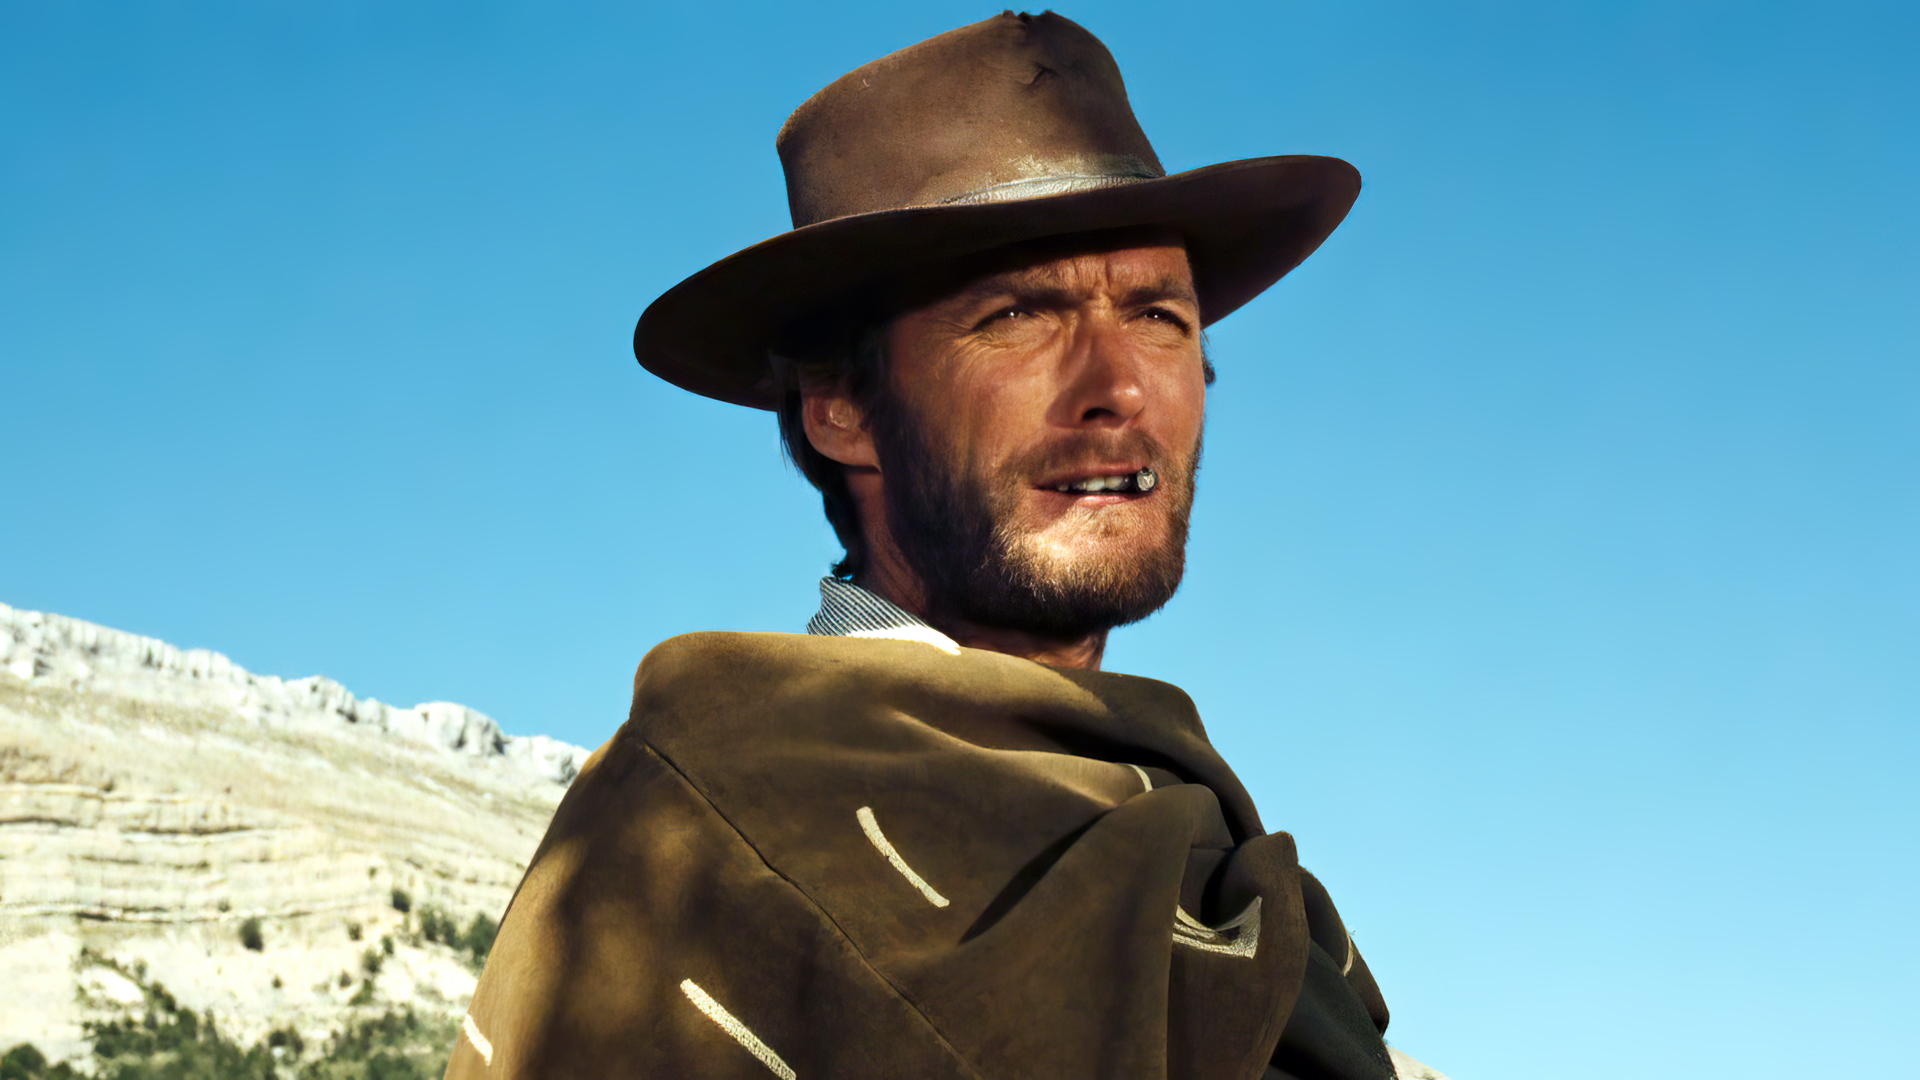 The Good The Bad And The Ugly Movies Film Stills Clint Eastwood Cigars Hat Sky Ponchos Western Actor 1920x1080